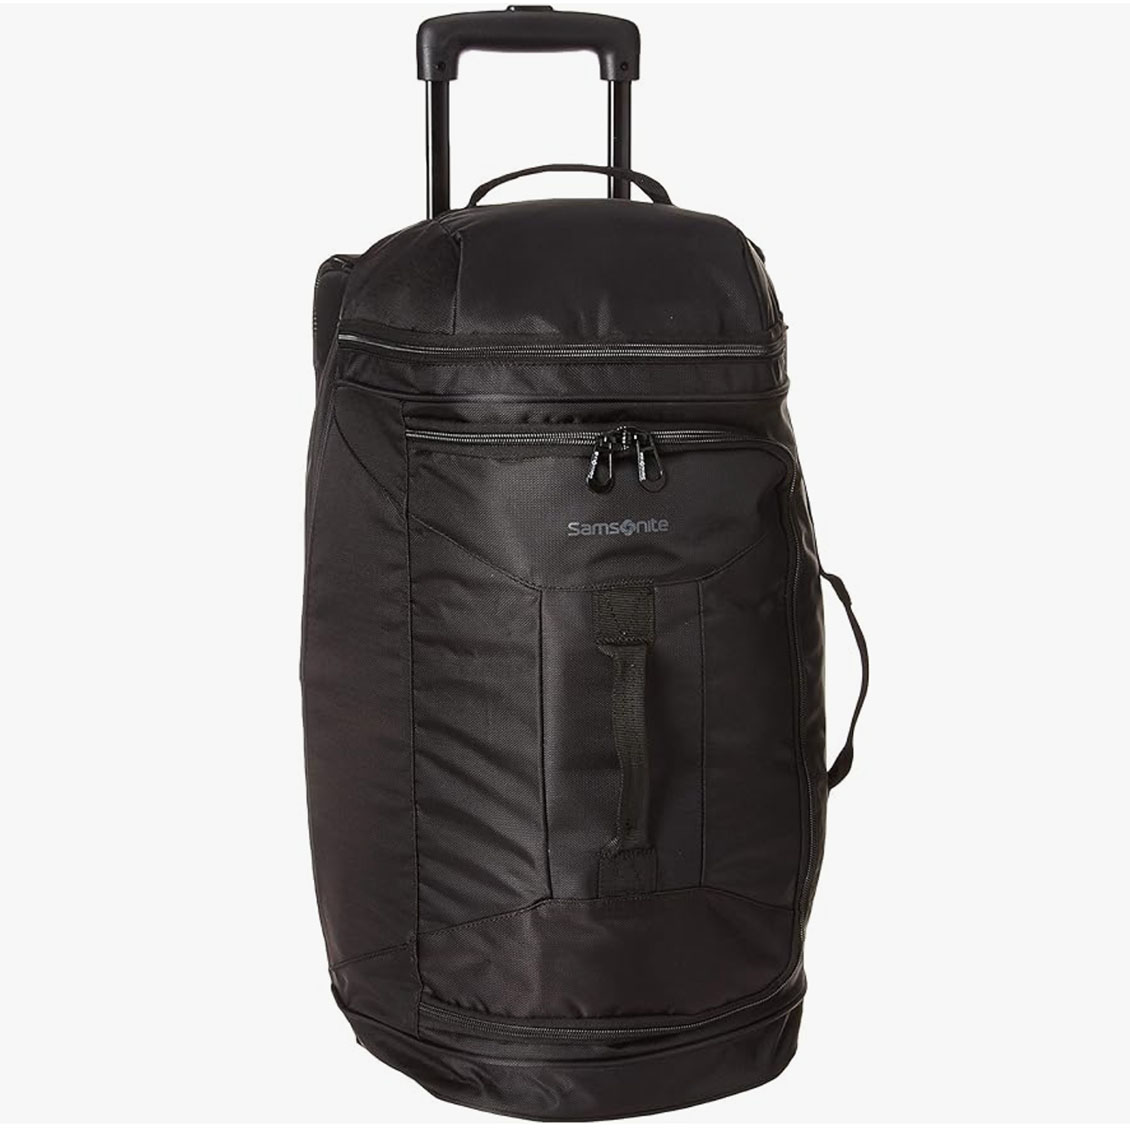 Black rolling duffel bag with handle